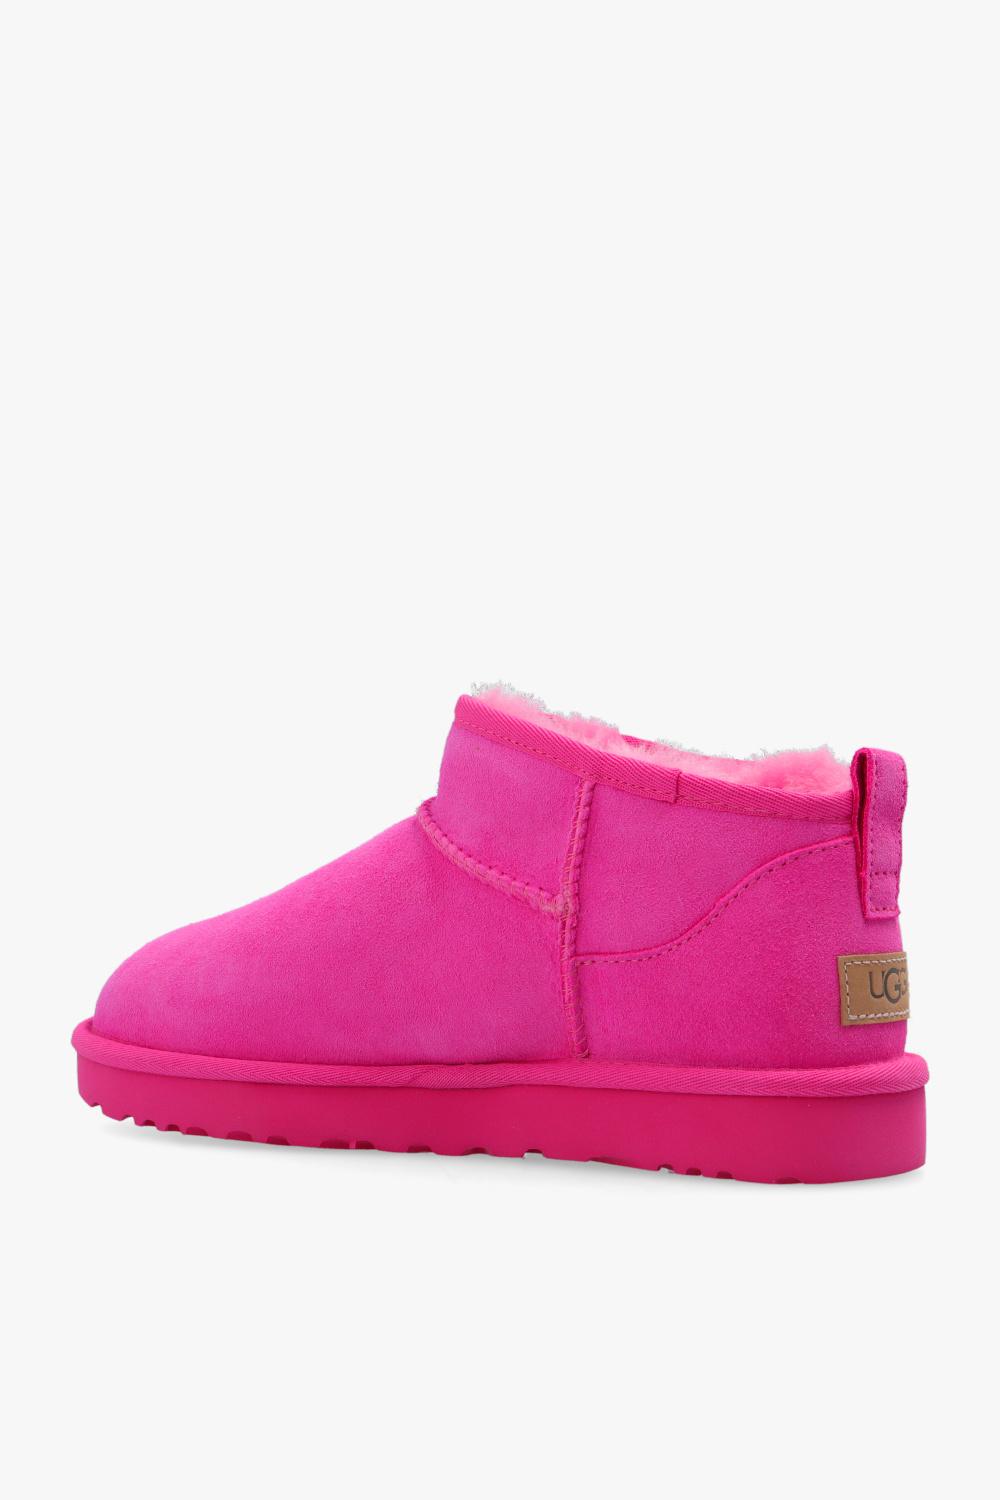 UGG Suede 'classic Ultra Mini' Snow Boots in Pink | Lyst